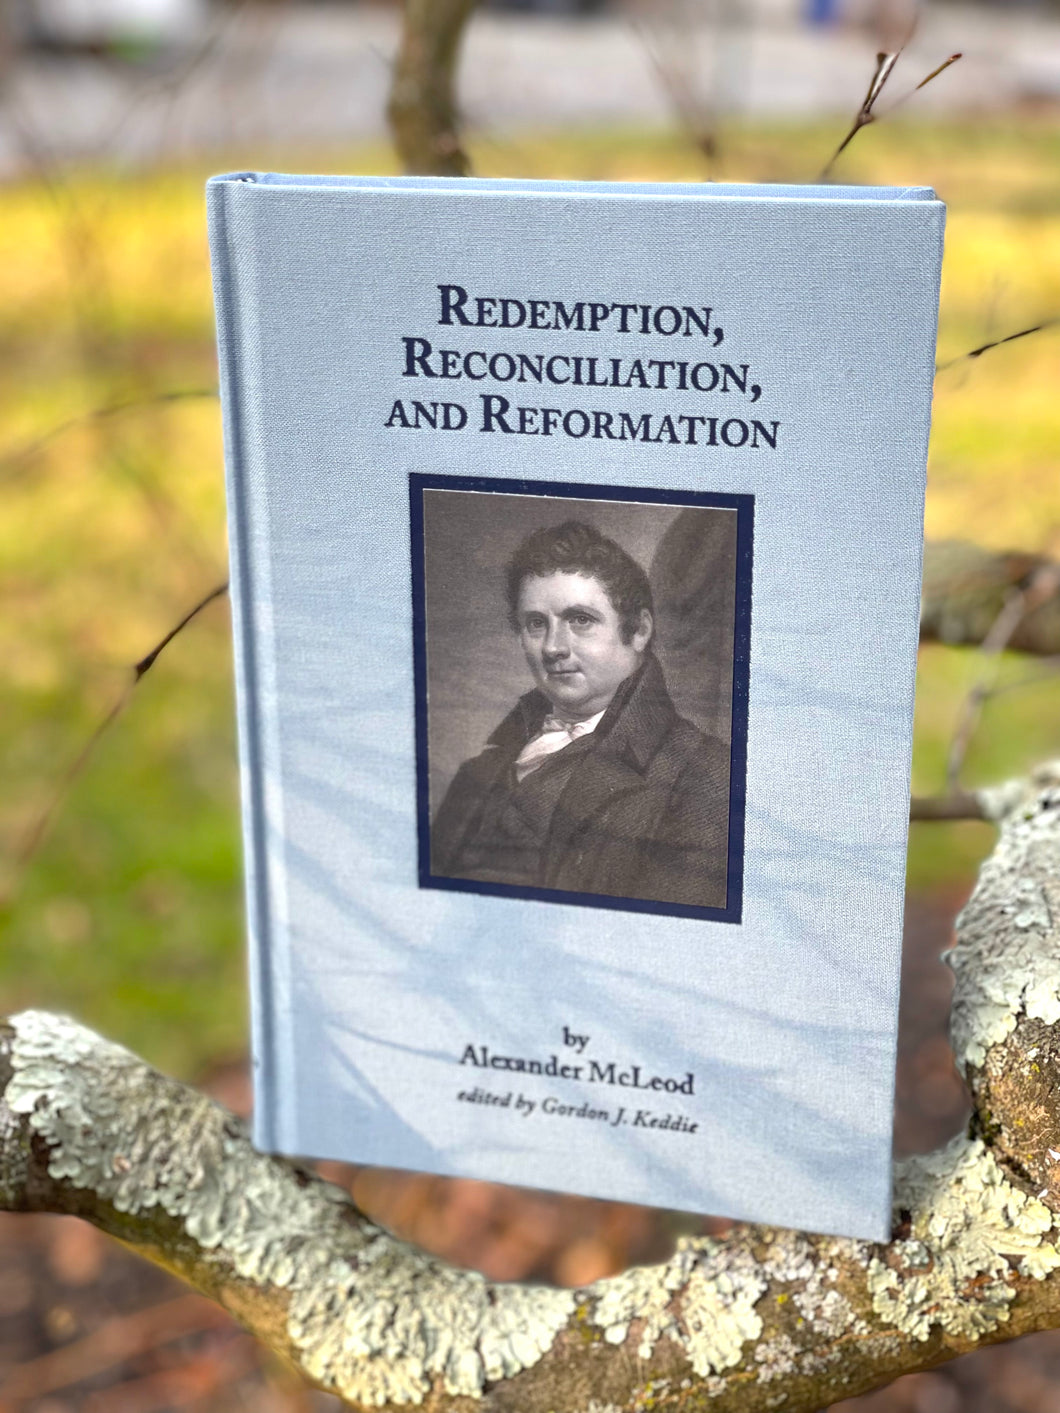 Redemption, Reconciliation, and Reformation